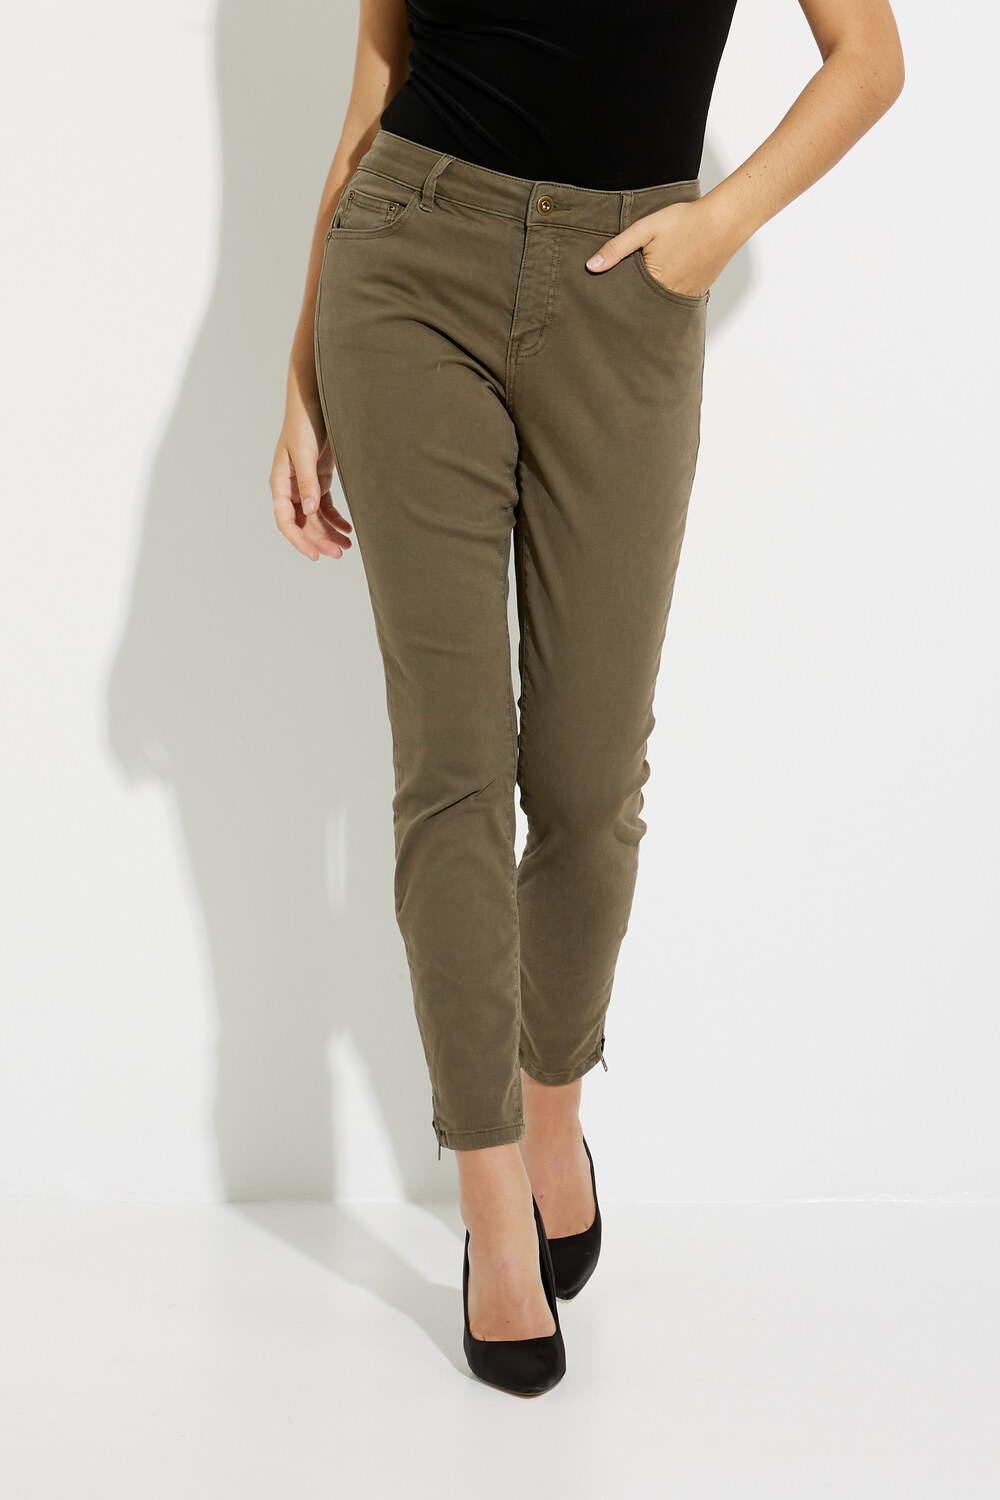 Ankle Twill Pants with Side Zipper Style C5233S. Pine